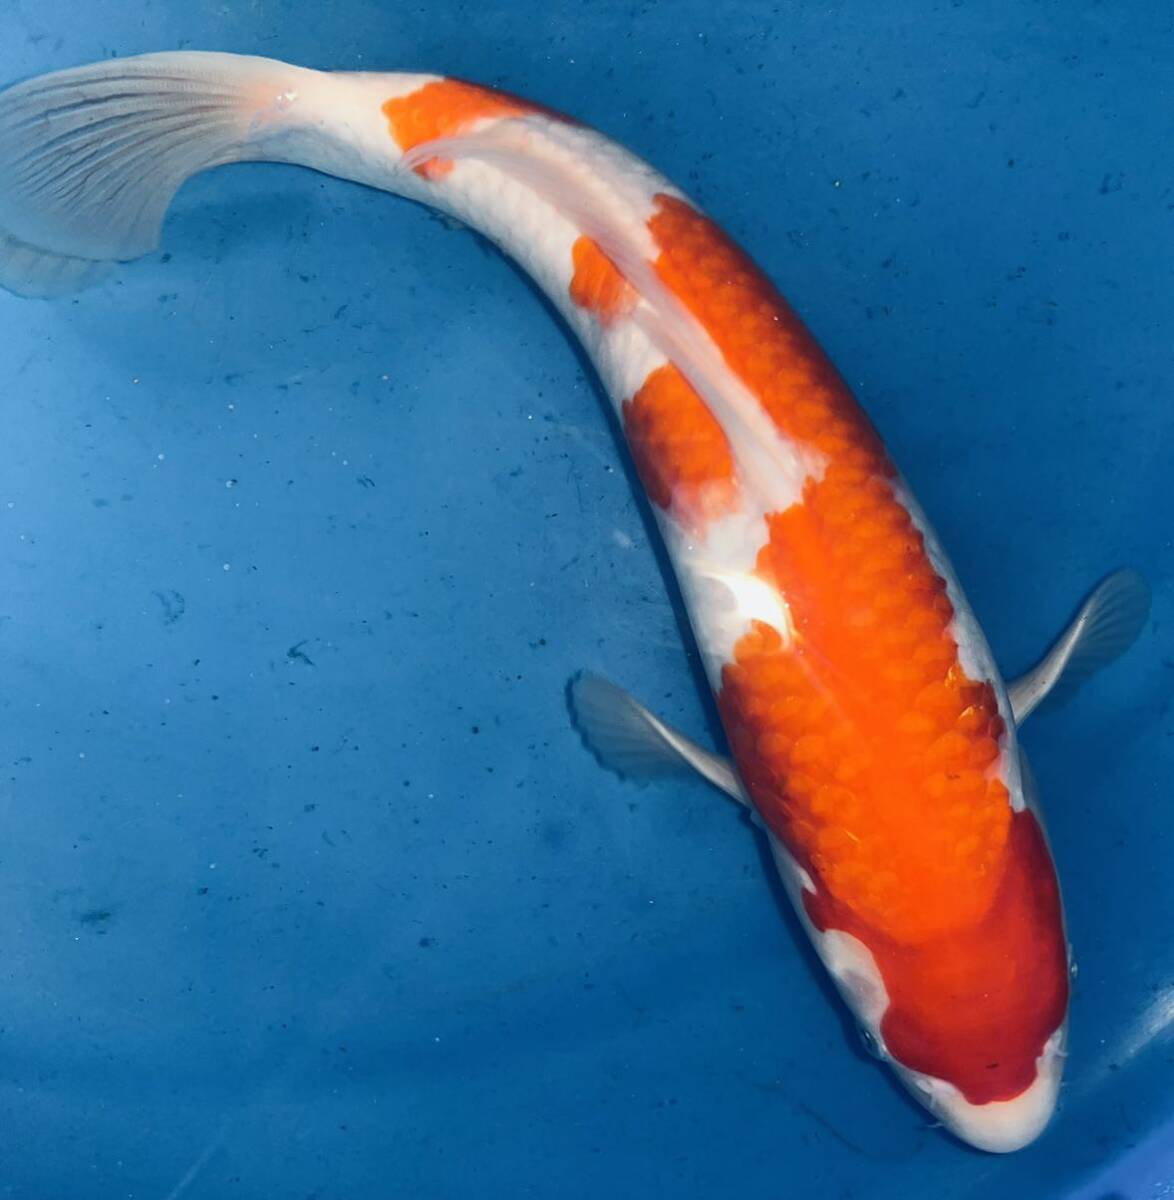 ... white 33. rom and rear (before and after) this year . another un- details Matsue colored carp center production colored carp ③